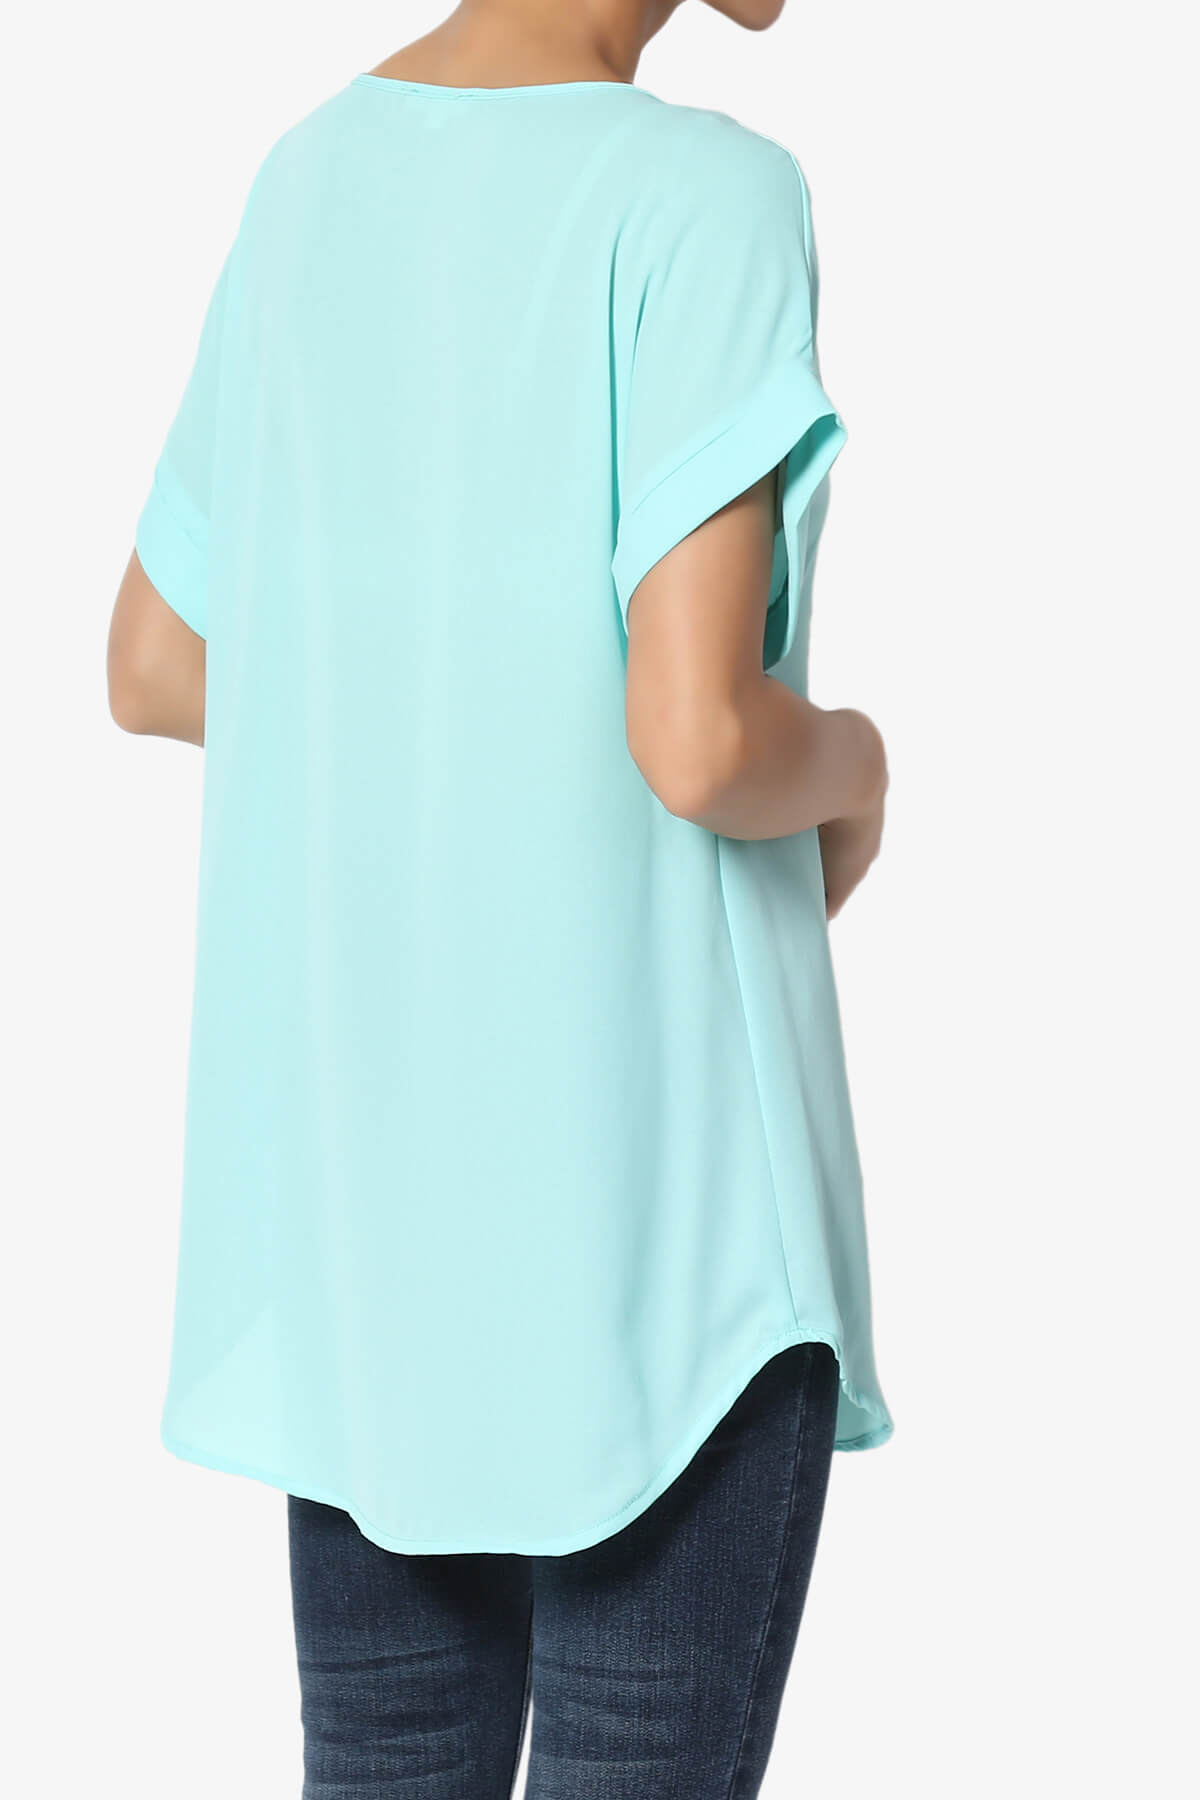 Load image into Gallery viewer, Juliette Boat Neck Chiffon Top BLUE MINT_4
